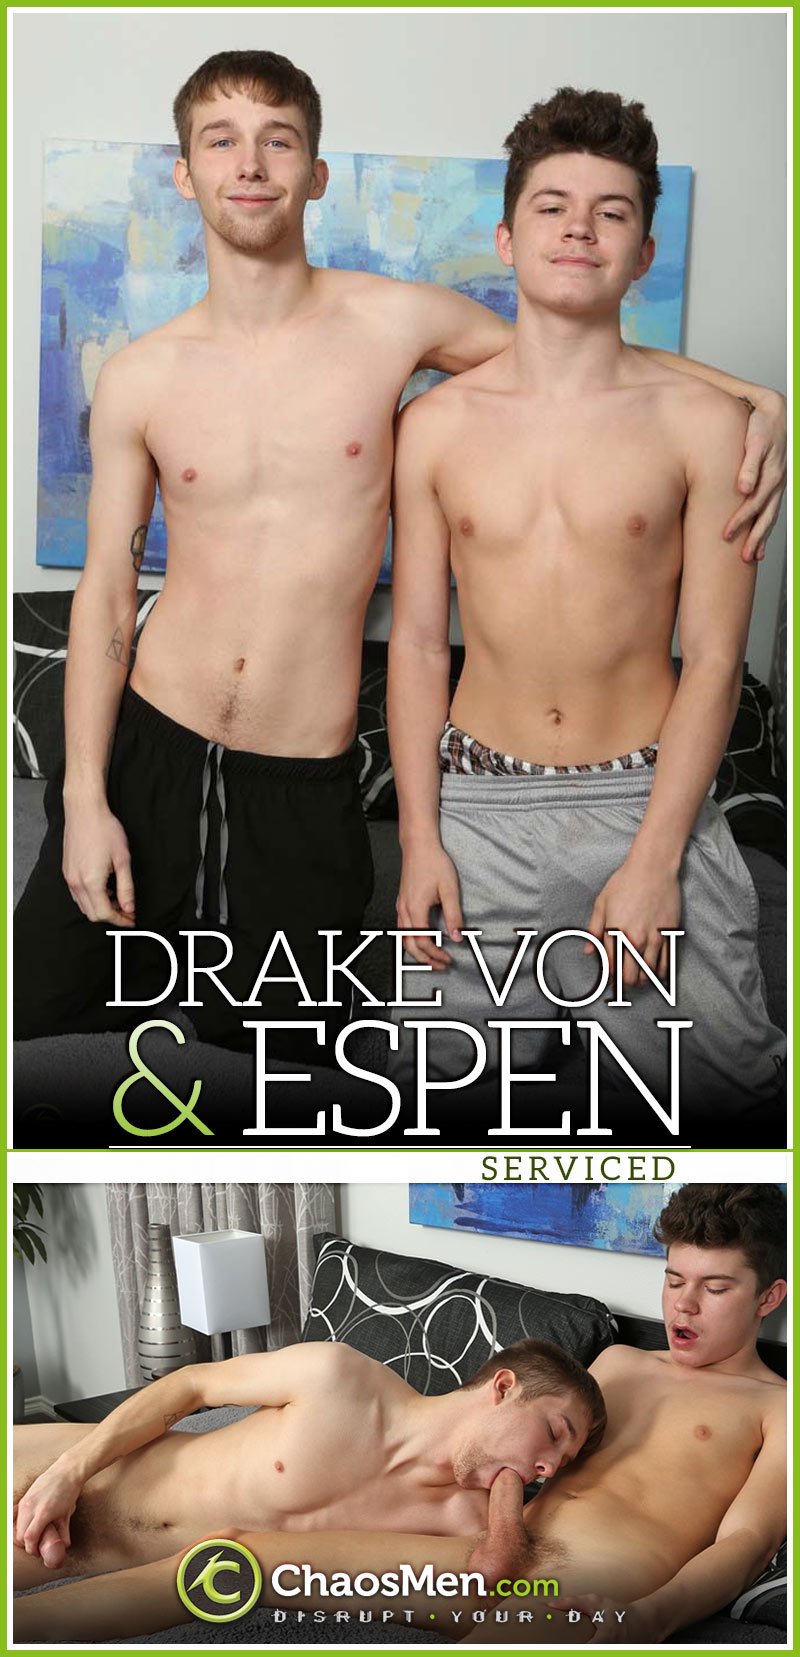 Drake Von of the 'Baconator Twins' and Espen SERVICE Each Other at ChaosMen